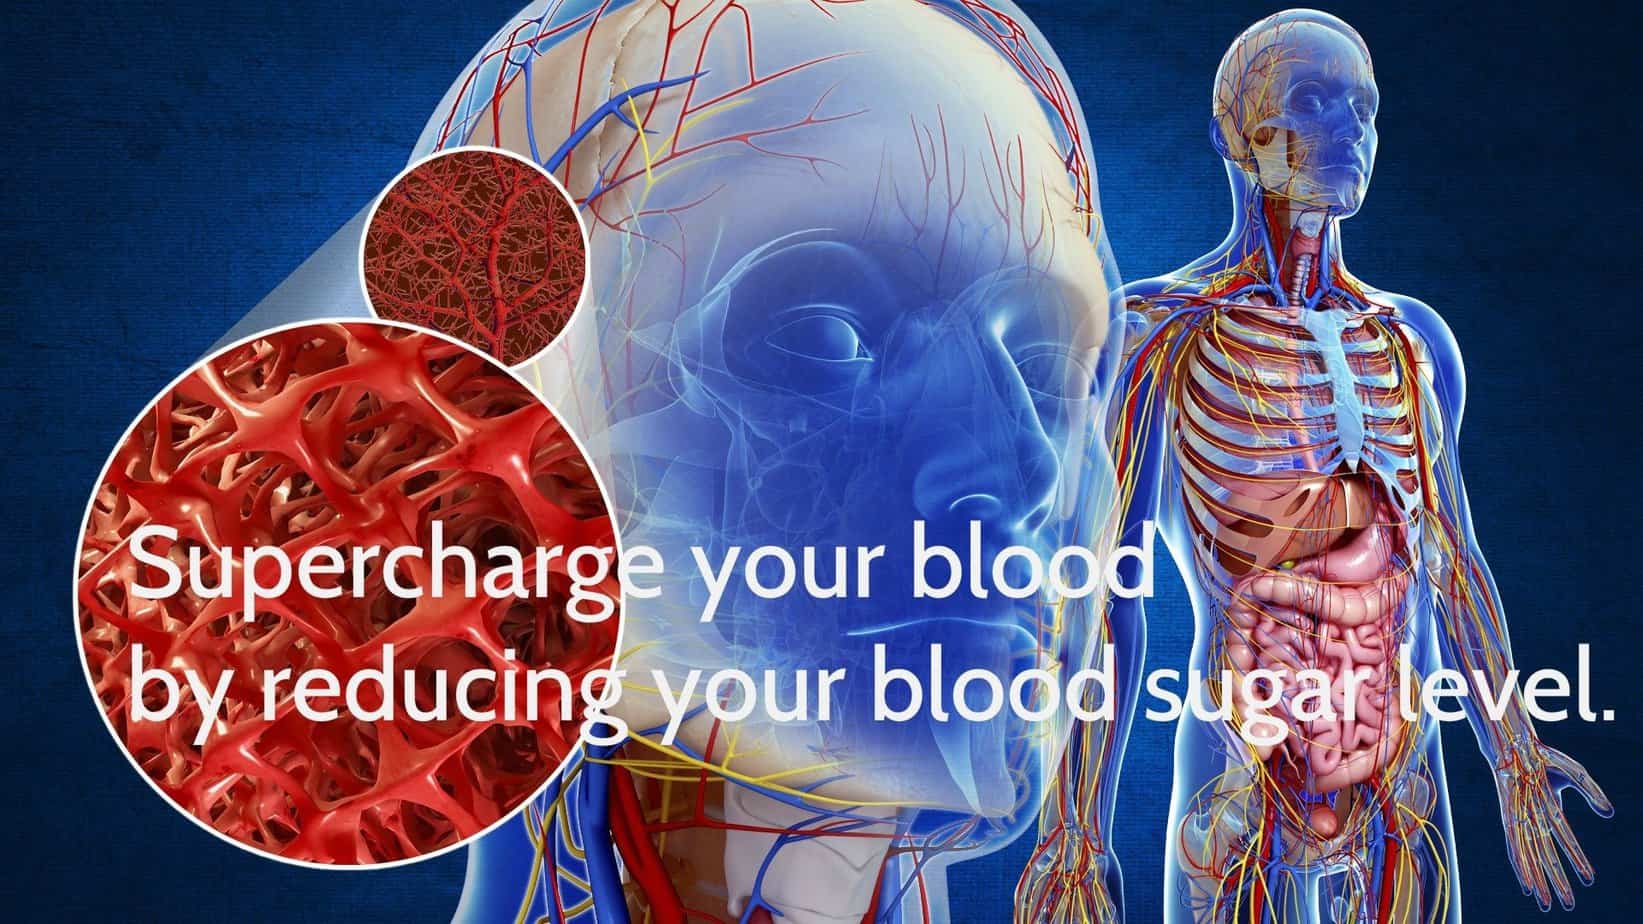 8 steps to lower your blood sugar